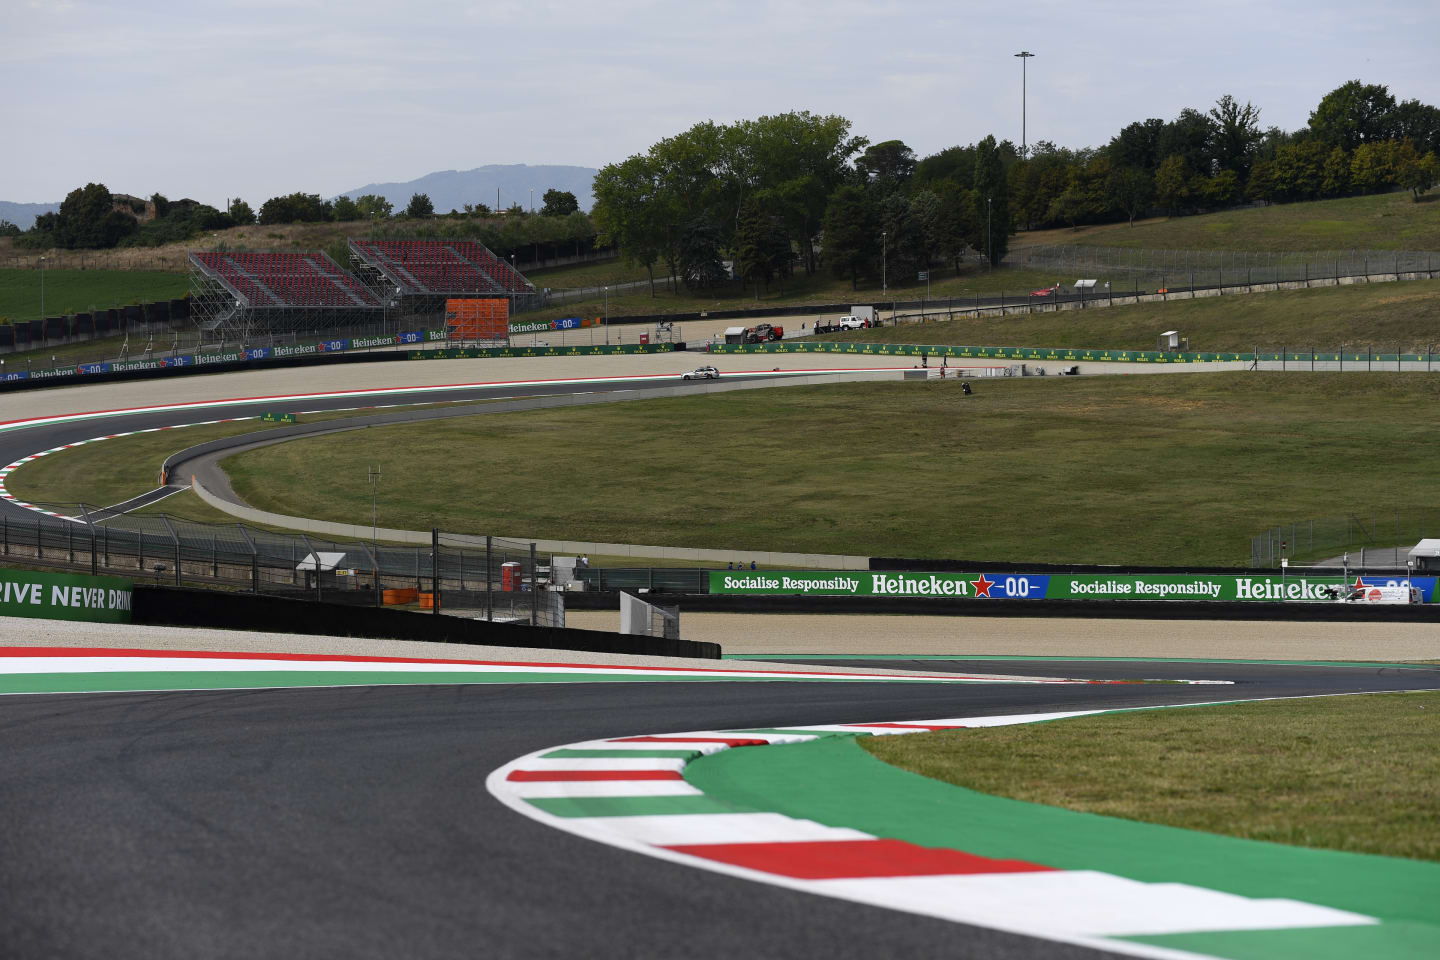 SCARPERIA, ITALY - SEPTEMBER 10: A general view of the circuit during previews ahead of the F1